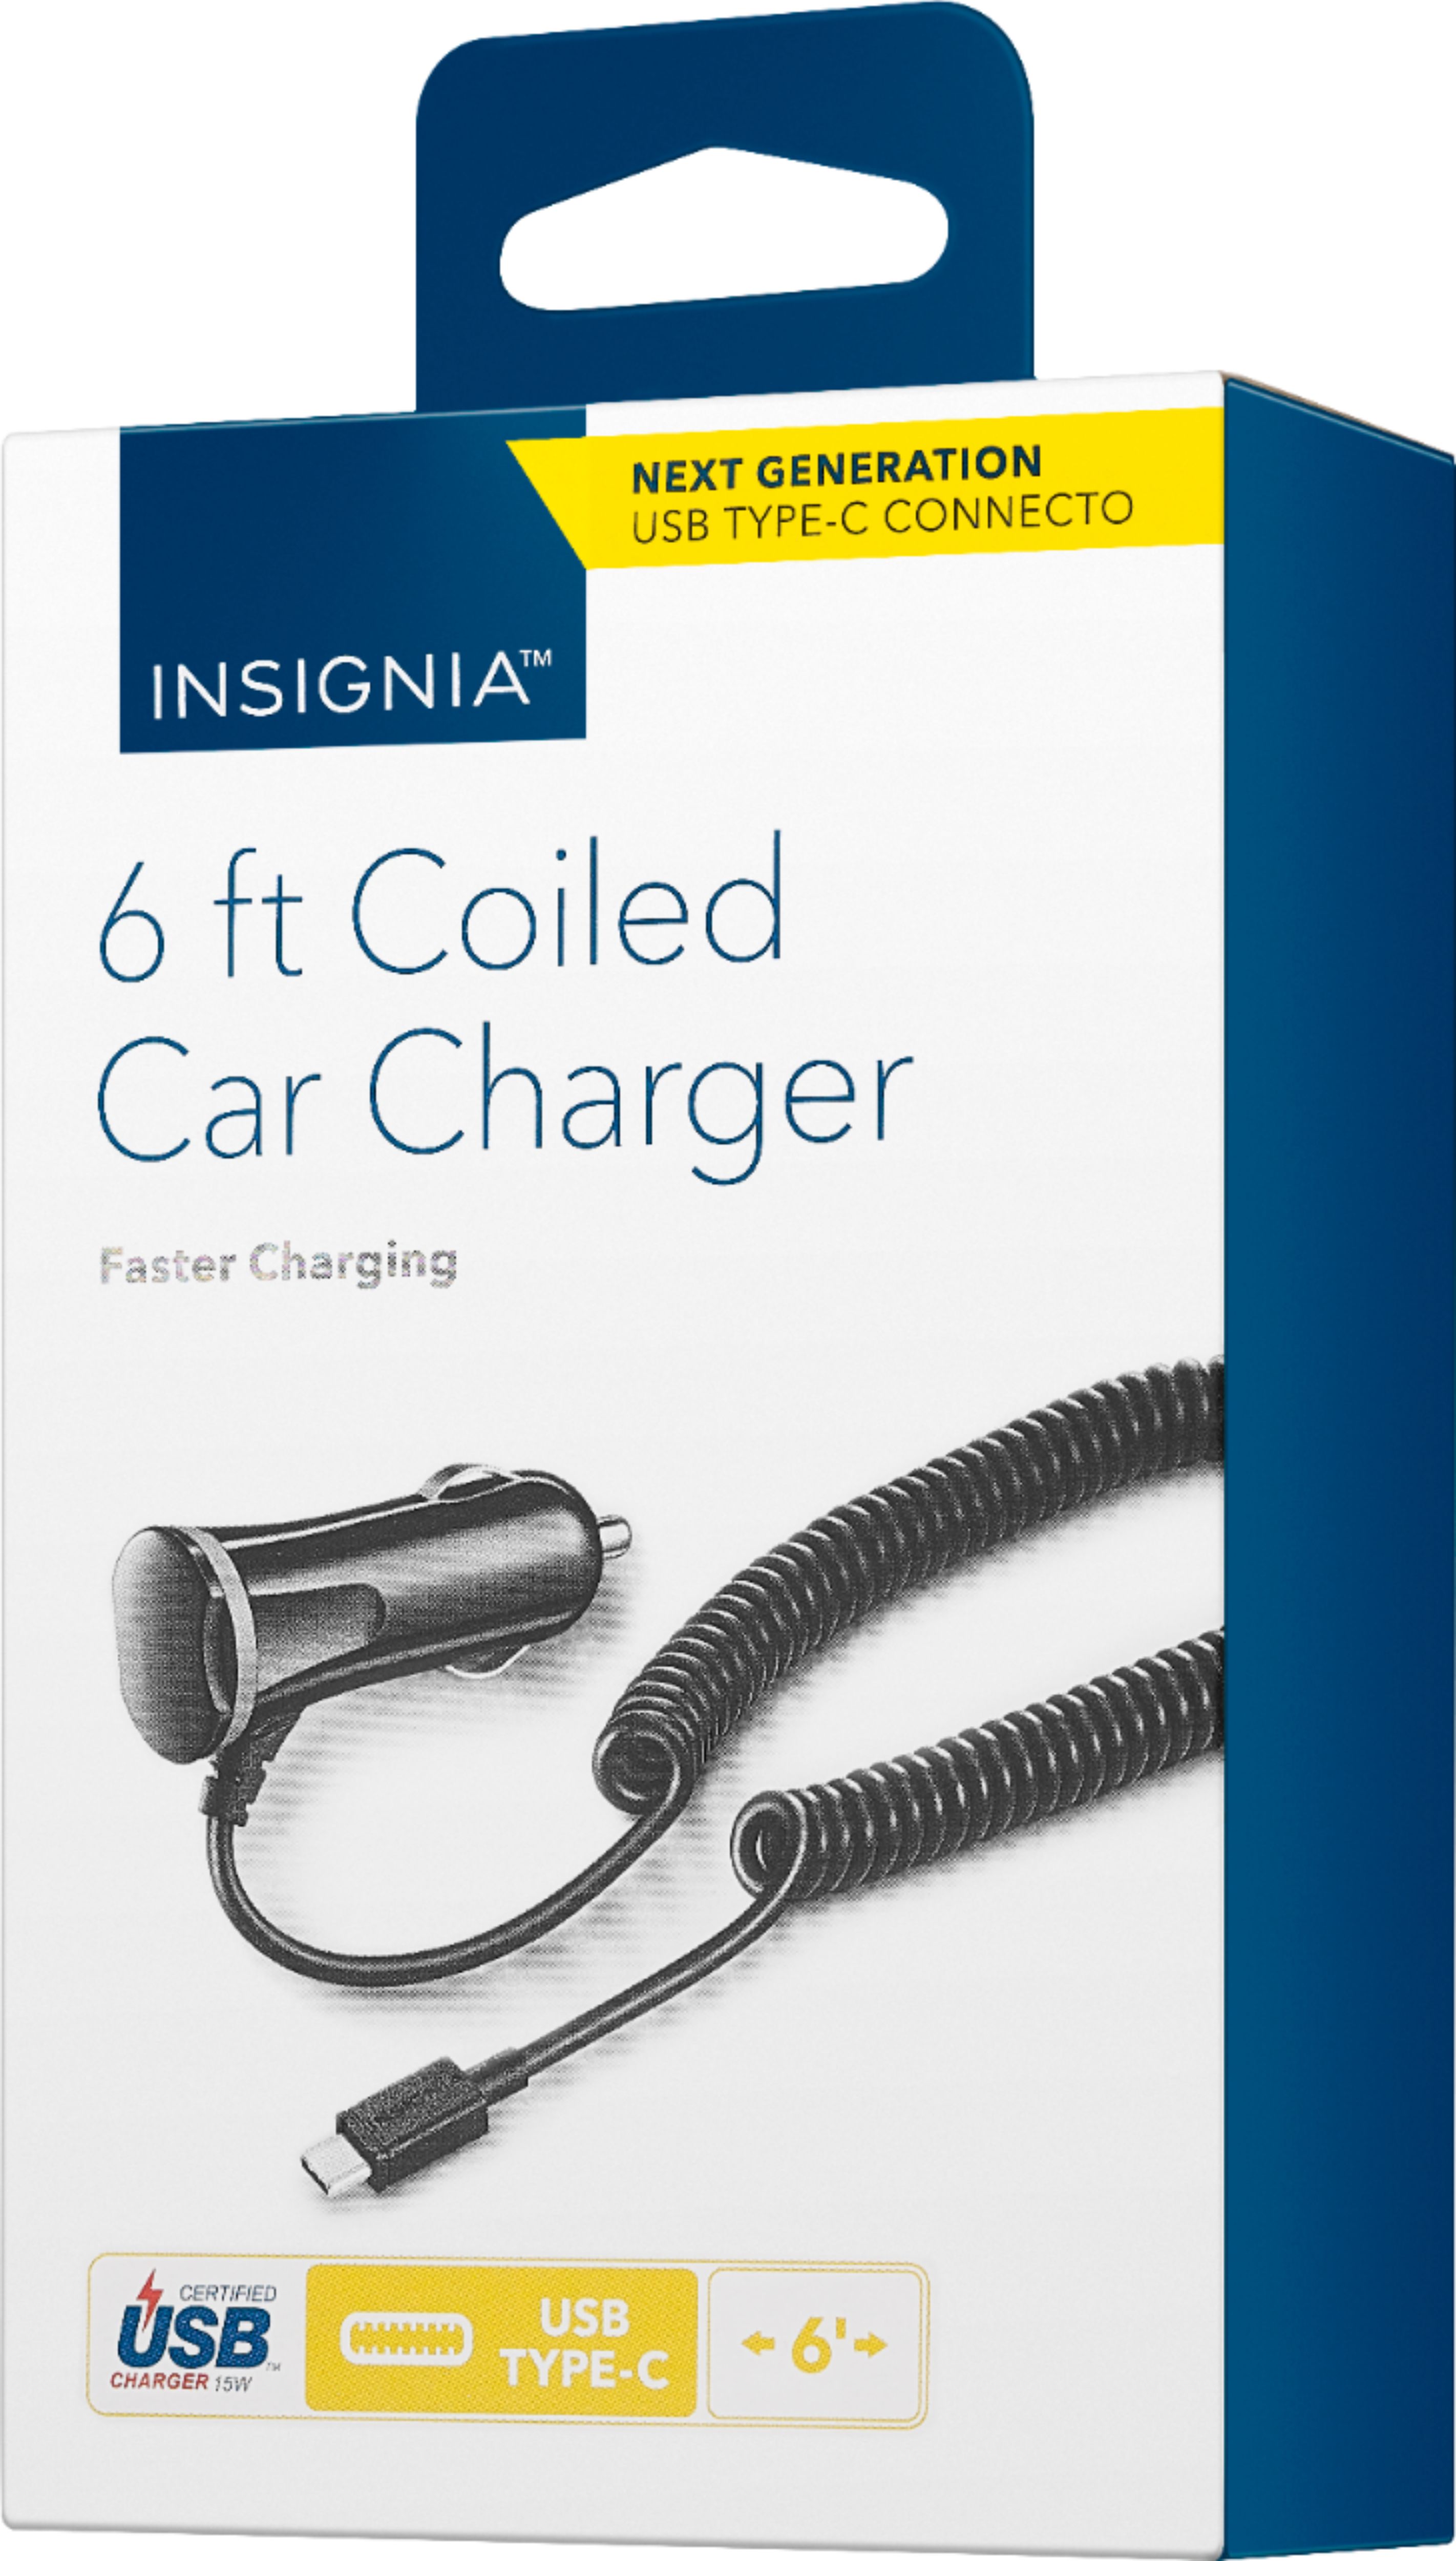 Insignia - 15W USB-C Port Vehicle Charger with 6ft Coiled Cable - Black